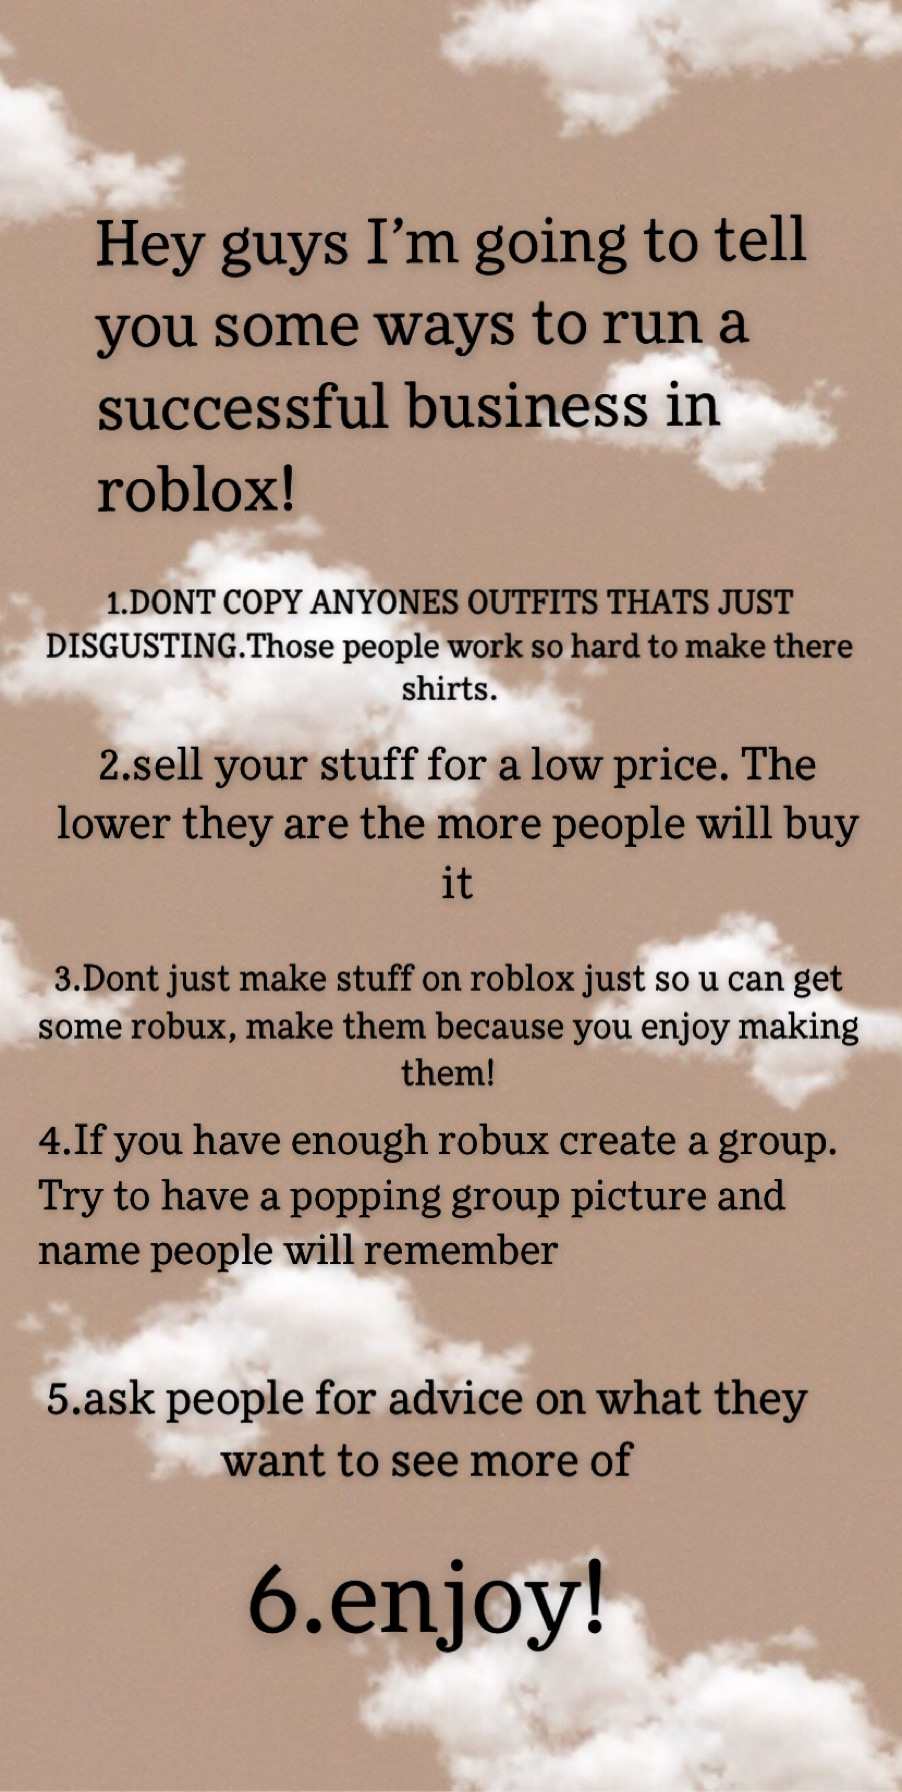 Roblox Giveaway Image By Roblox - how to make a successful roblox group